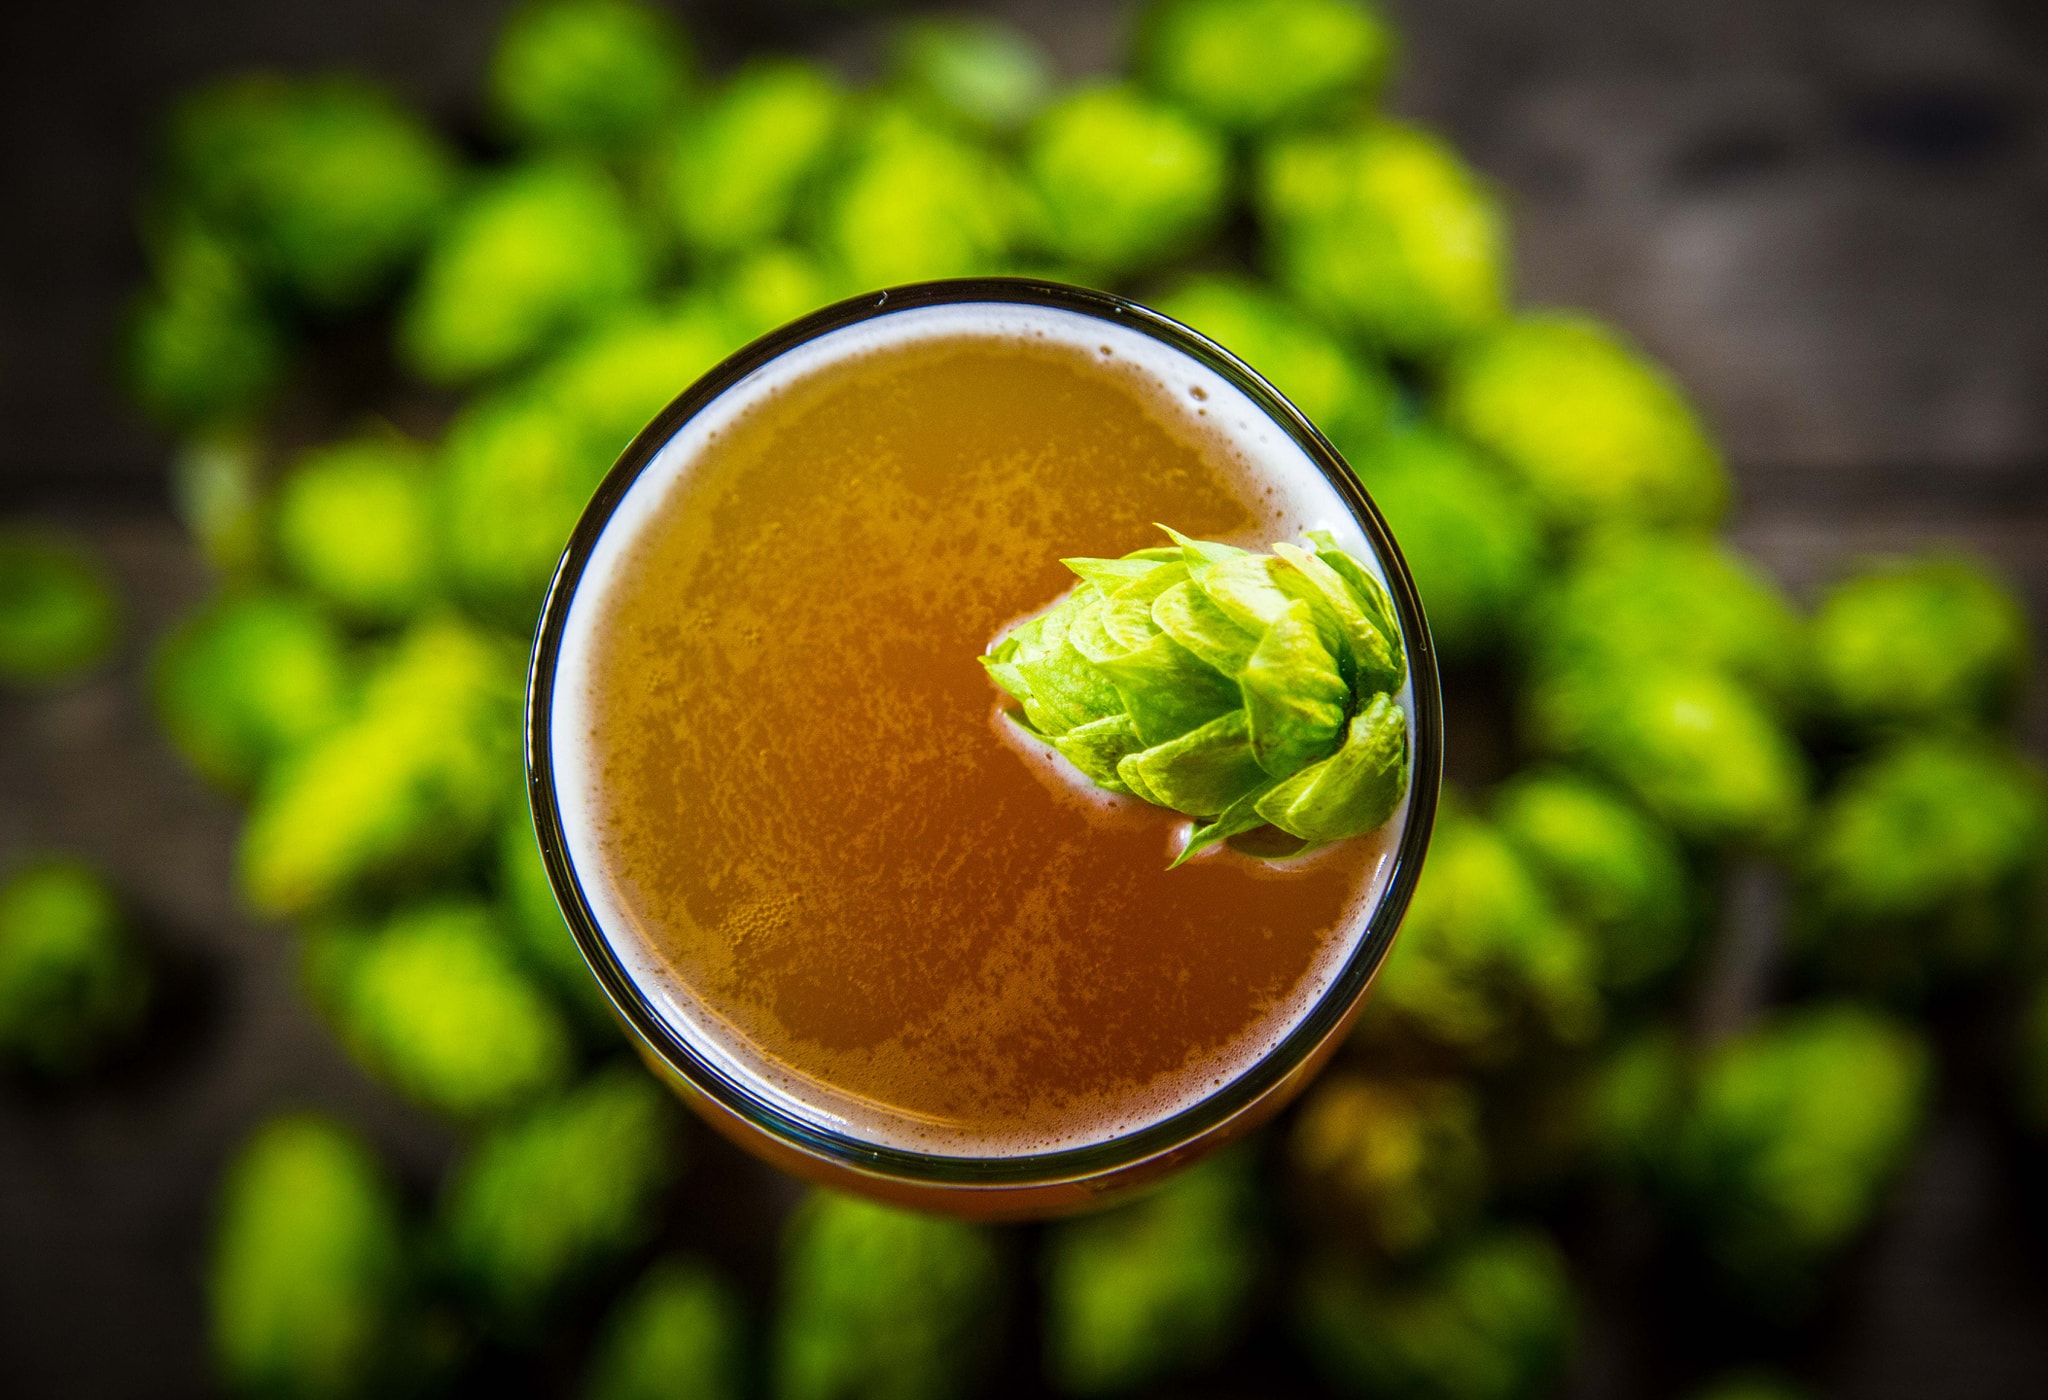 Wet-hopped beers made with fresh hops are available only in early fall. In this picture, beer from Fogbelt Brewing Company in Santa Rosa. View photos to learn more. (Courtesy of Fogbelt Brewing Company)